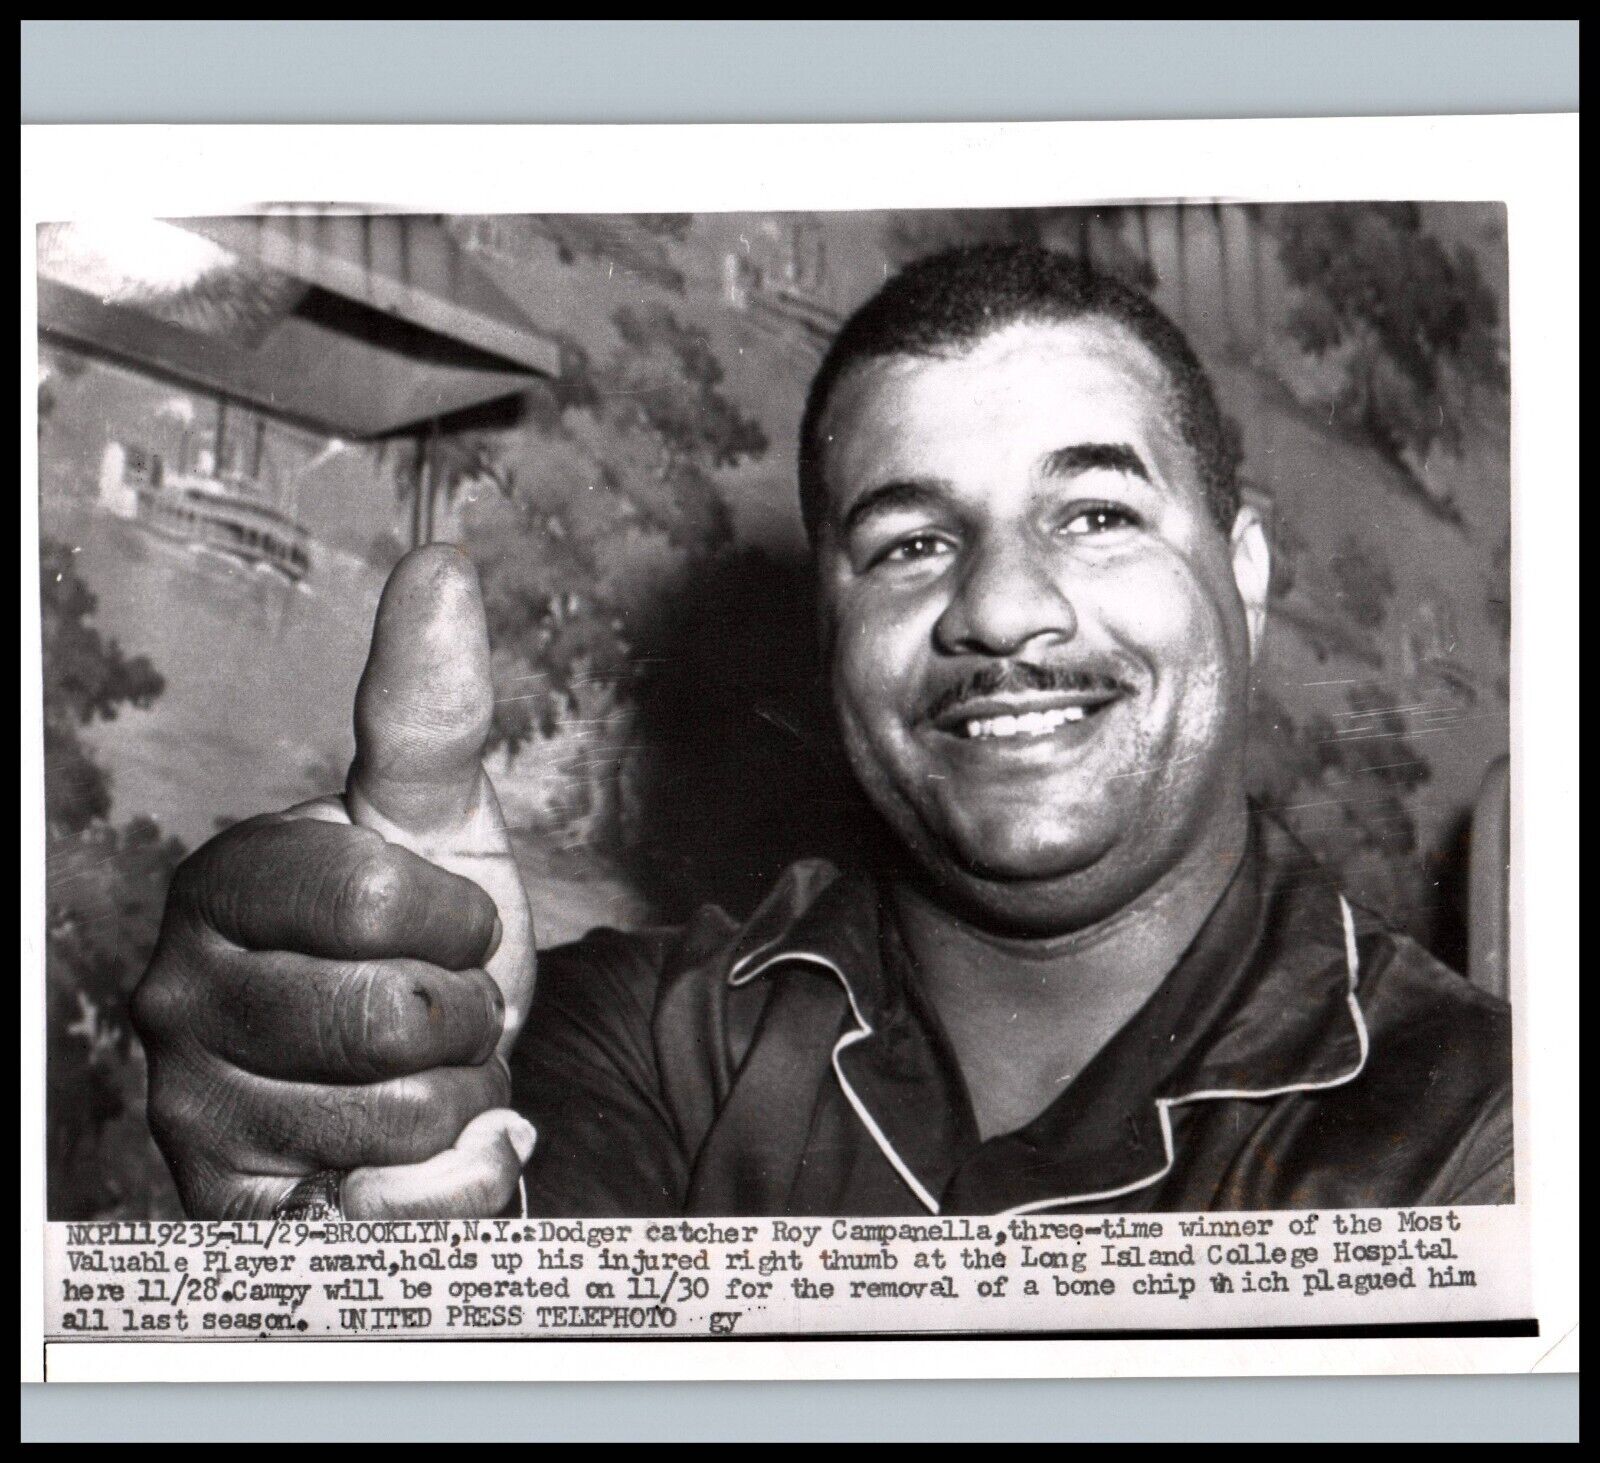 MLB NEW YORK DODGER CATCHER ROY CAMPANELLA RECOVERS FROM INJURY 1958 Photo Y 408